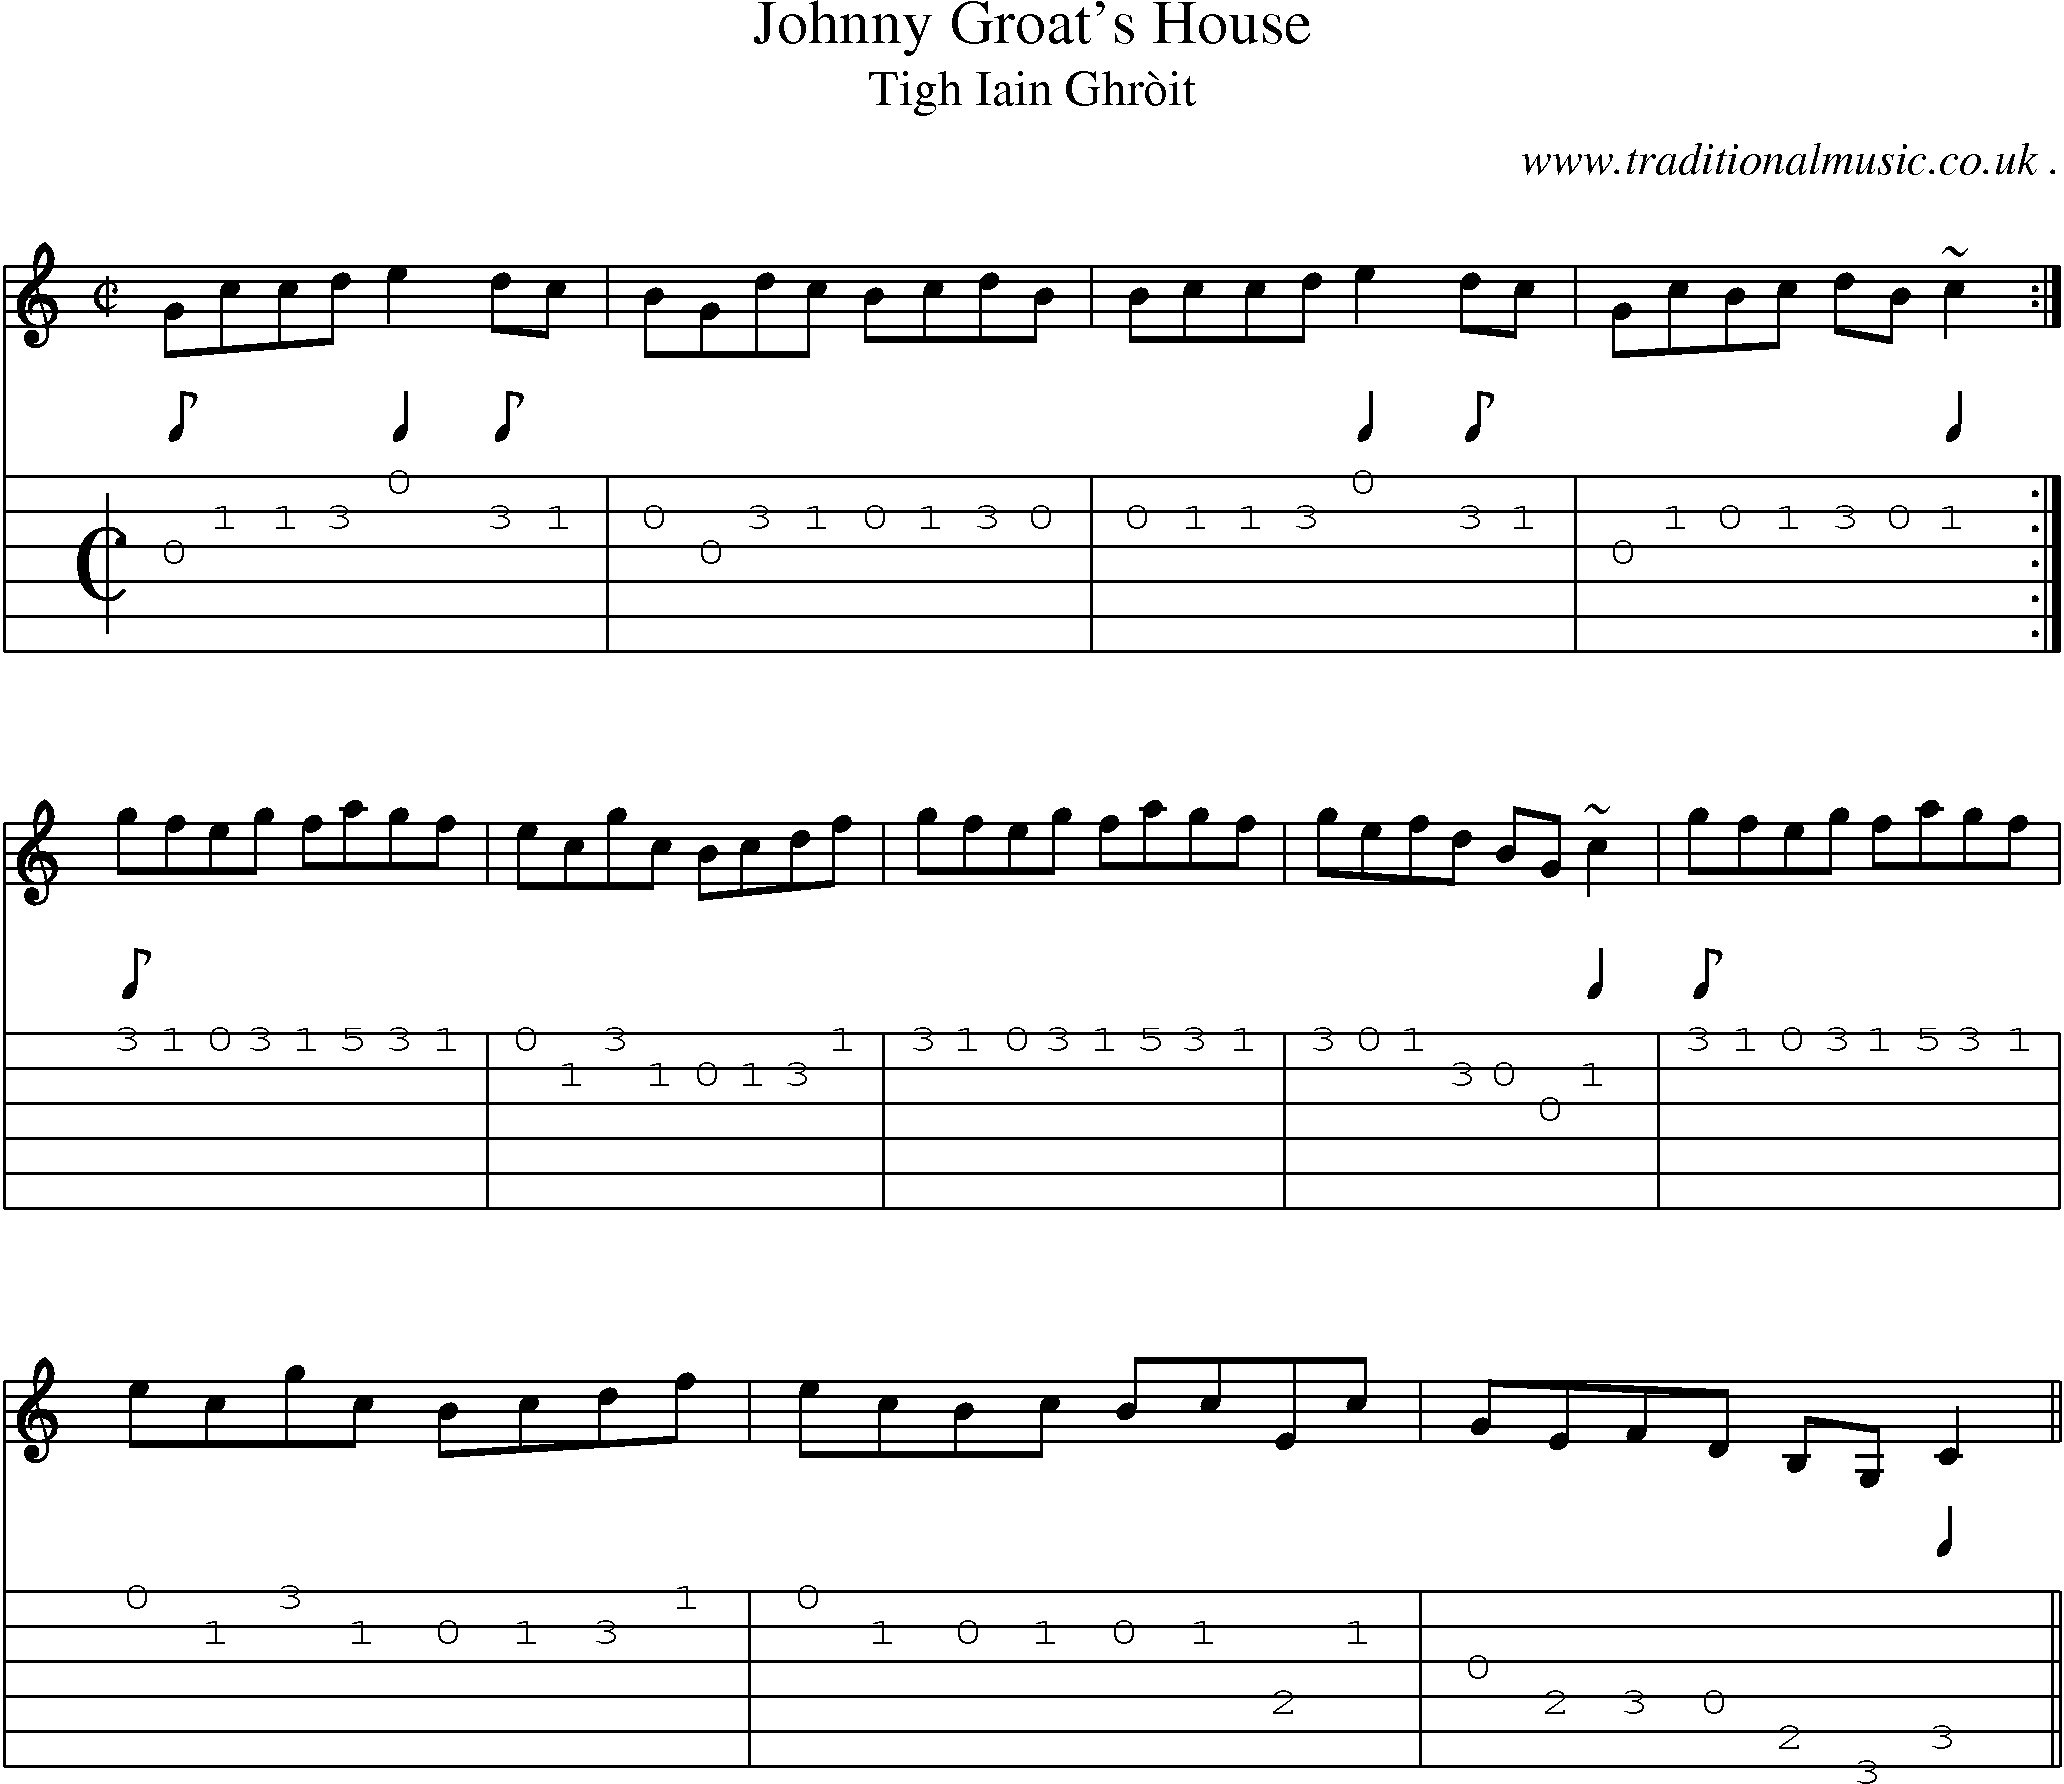 Sheet-music  score, Chords and Guitar Tabs for Johnny Groats House